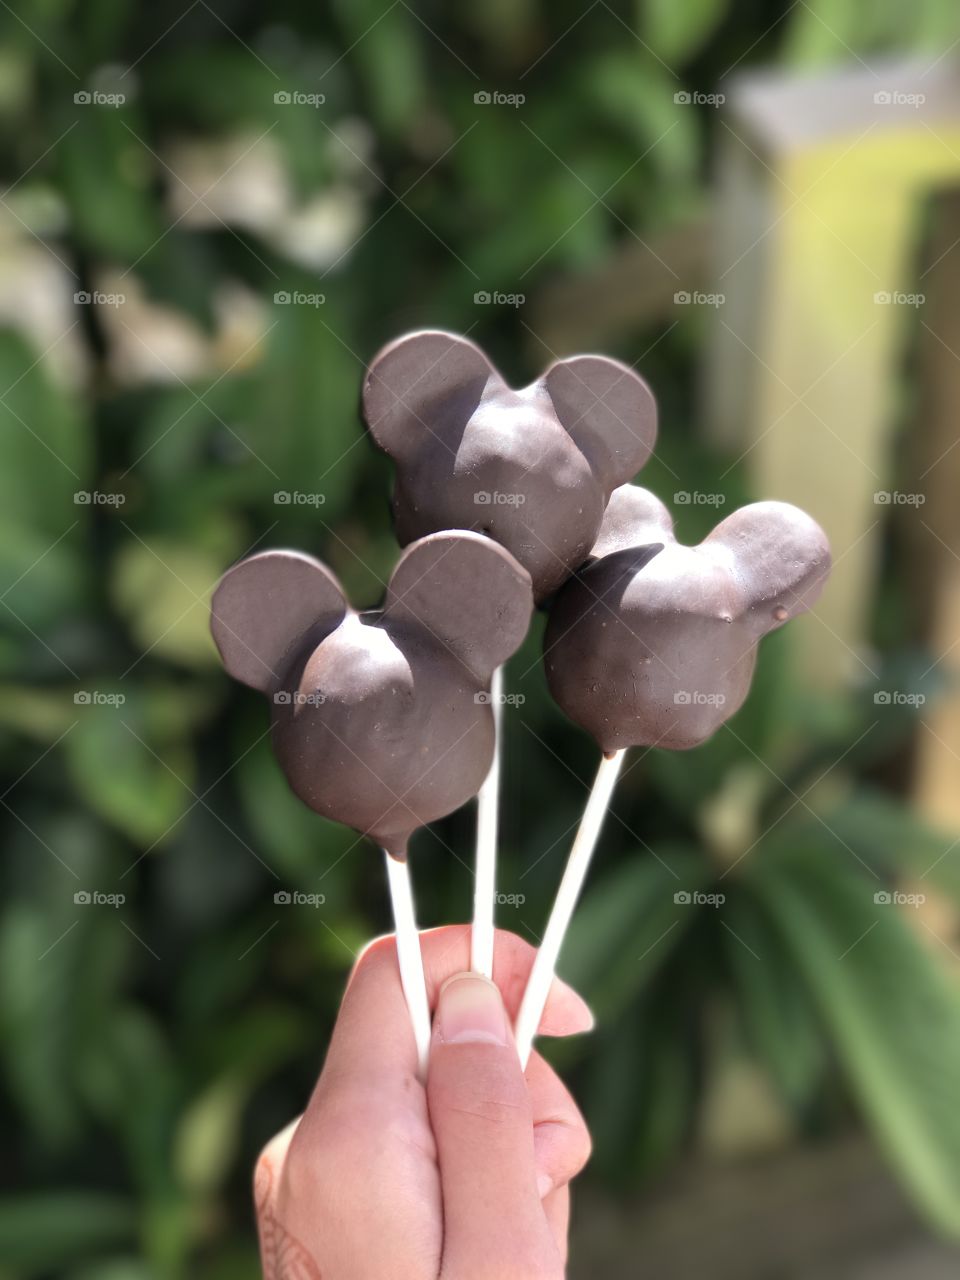 A person holding cake pops in hand